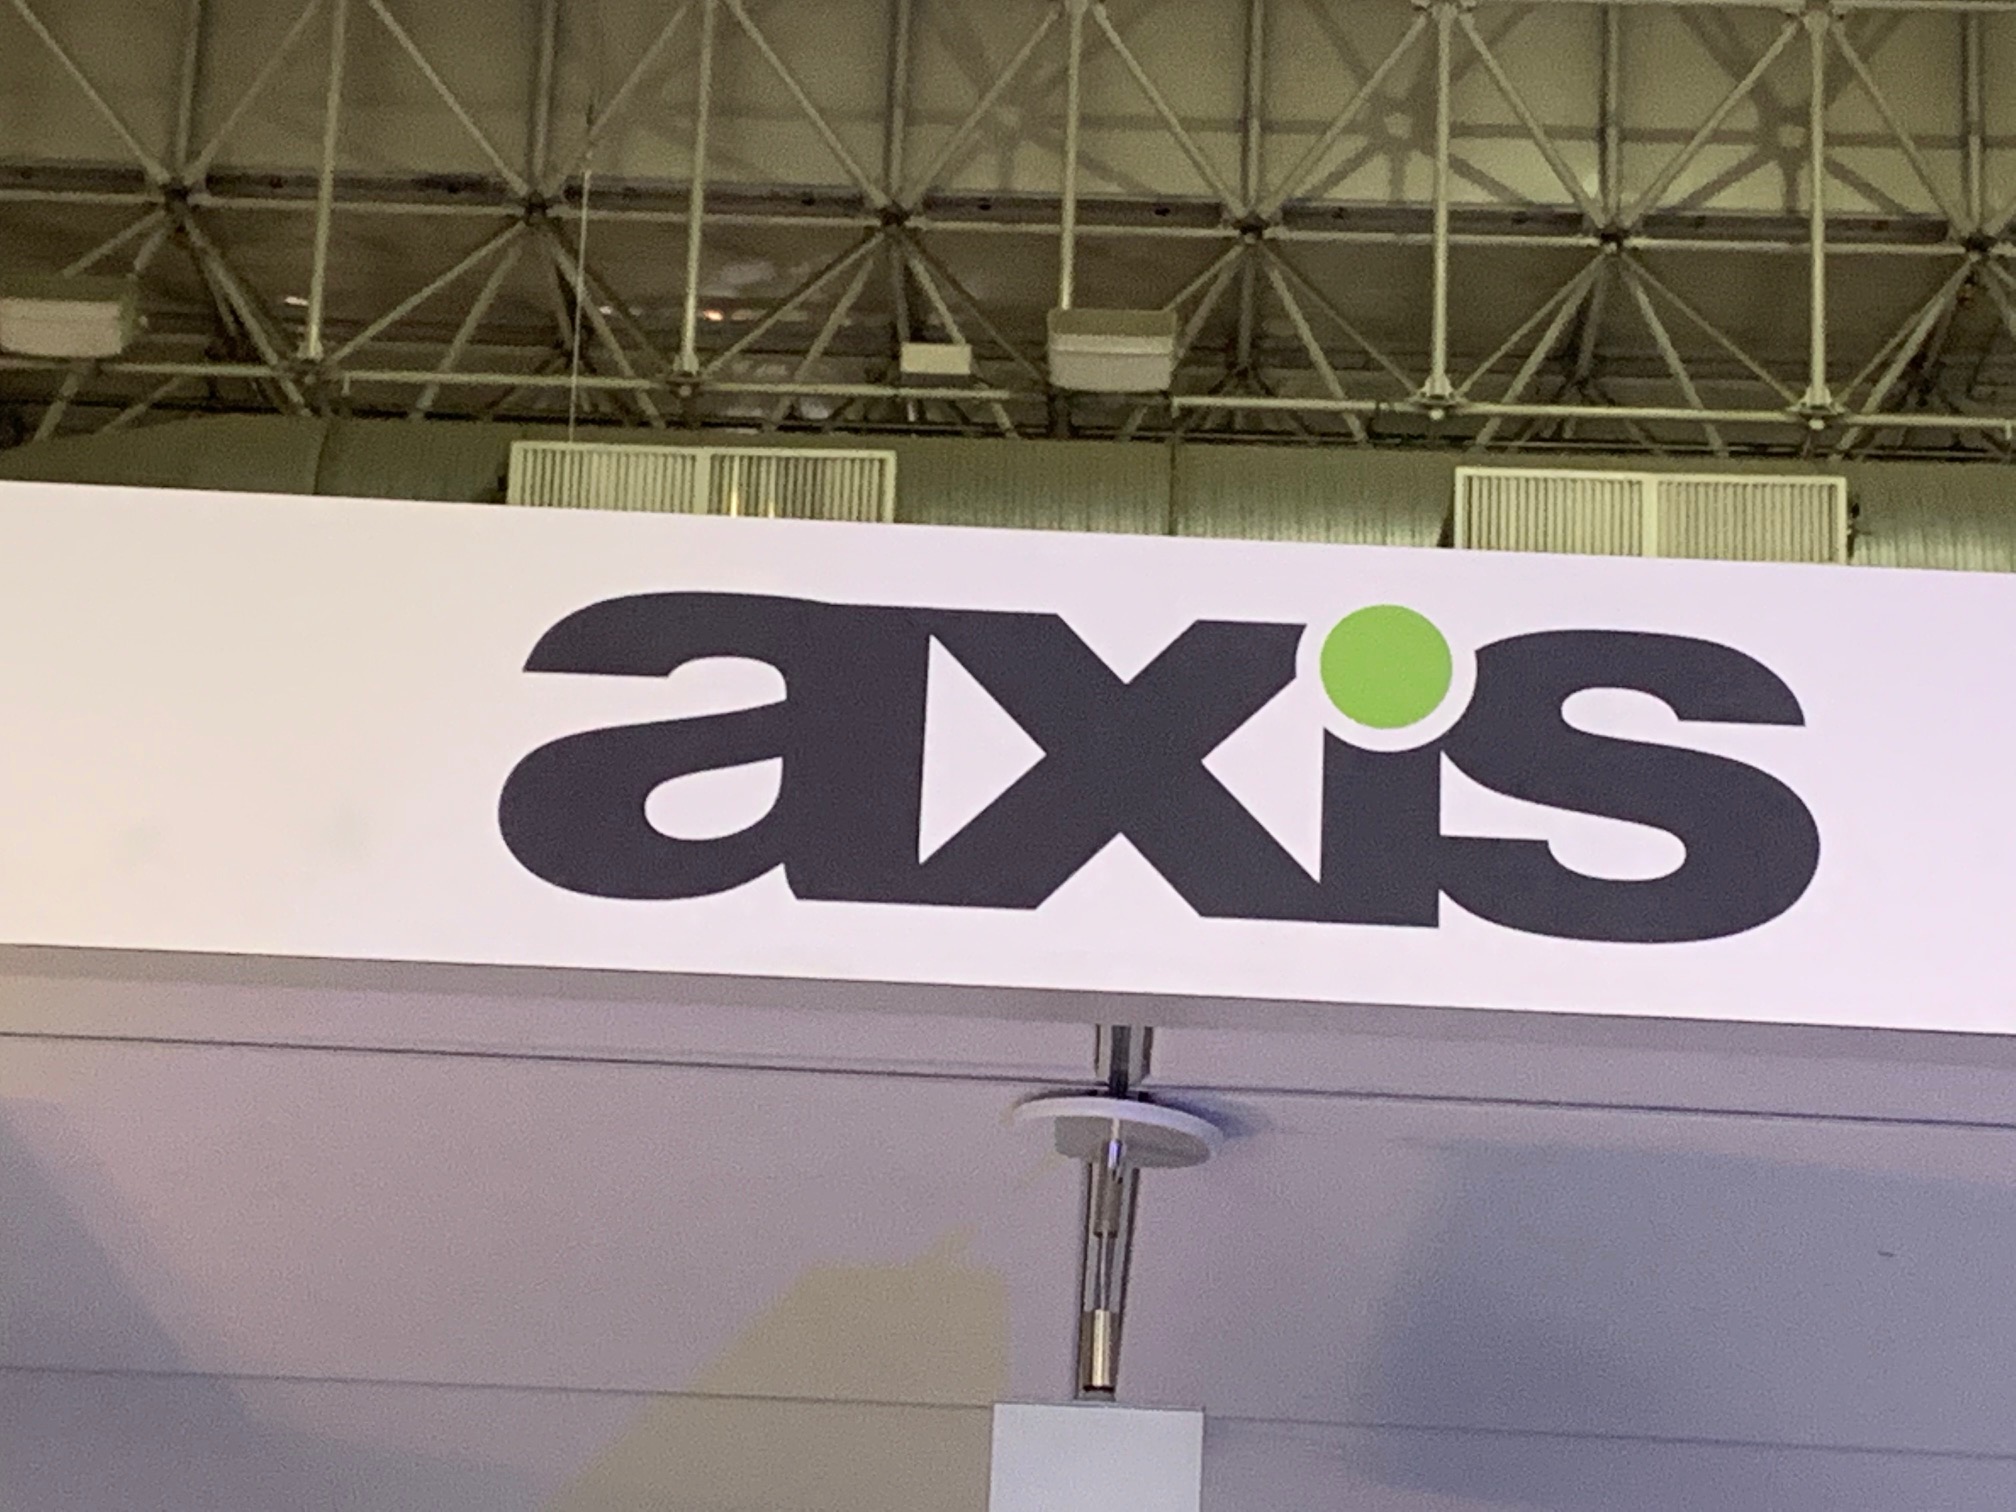 Read more about the article “Axis feeds North America:” The Latest Public Service Project from Axis Lighting